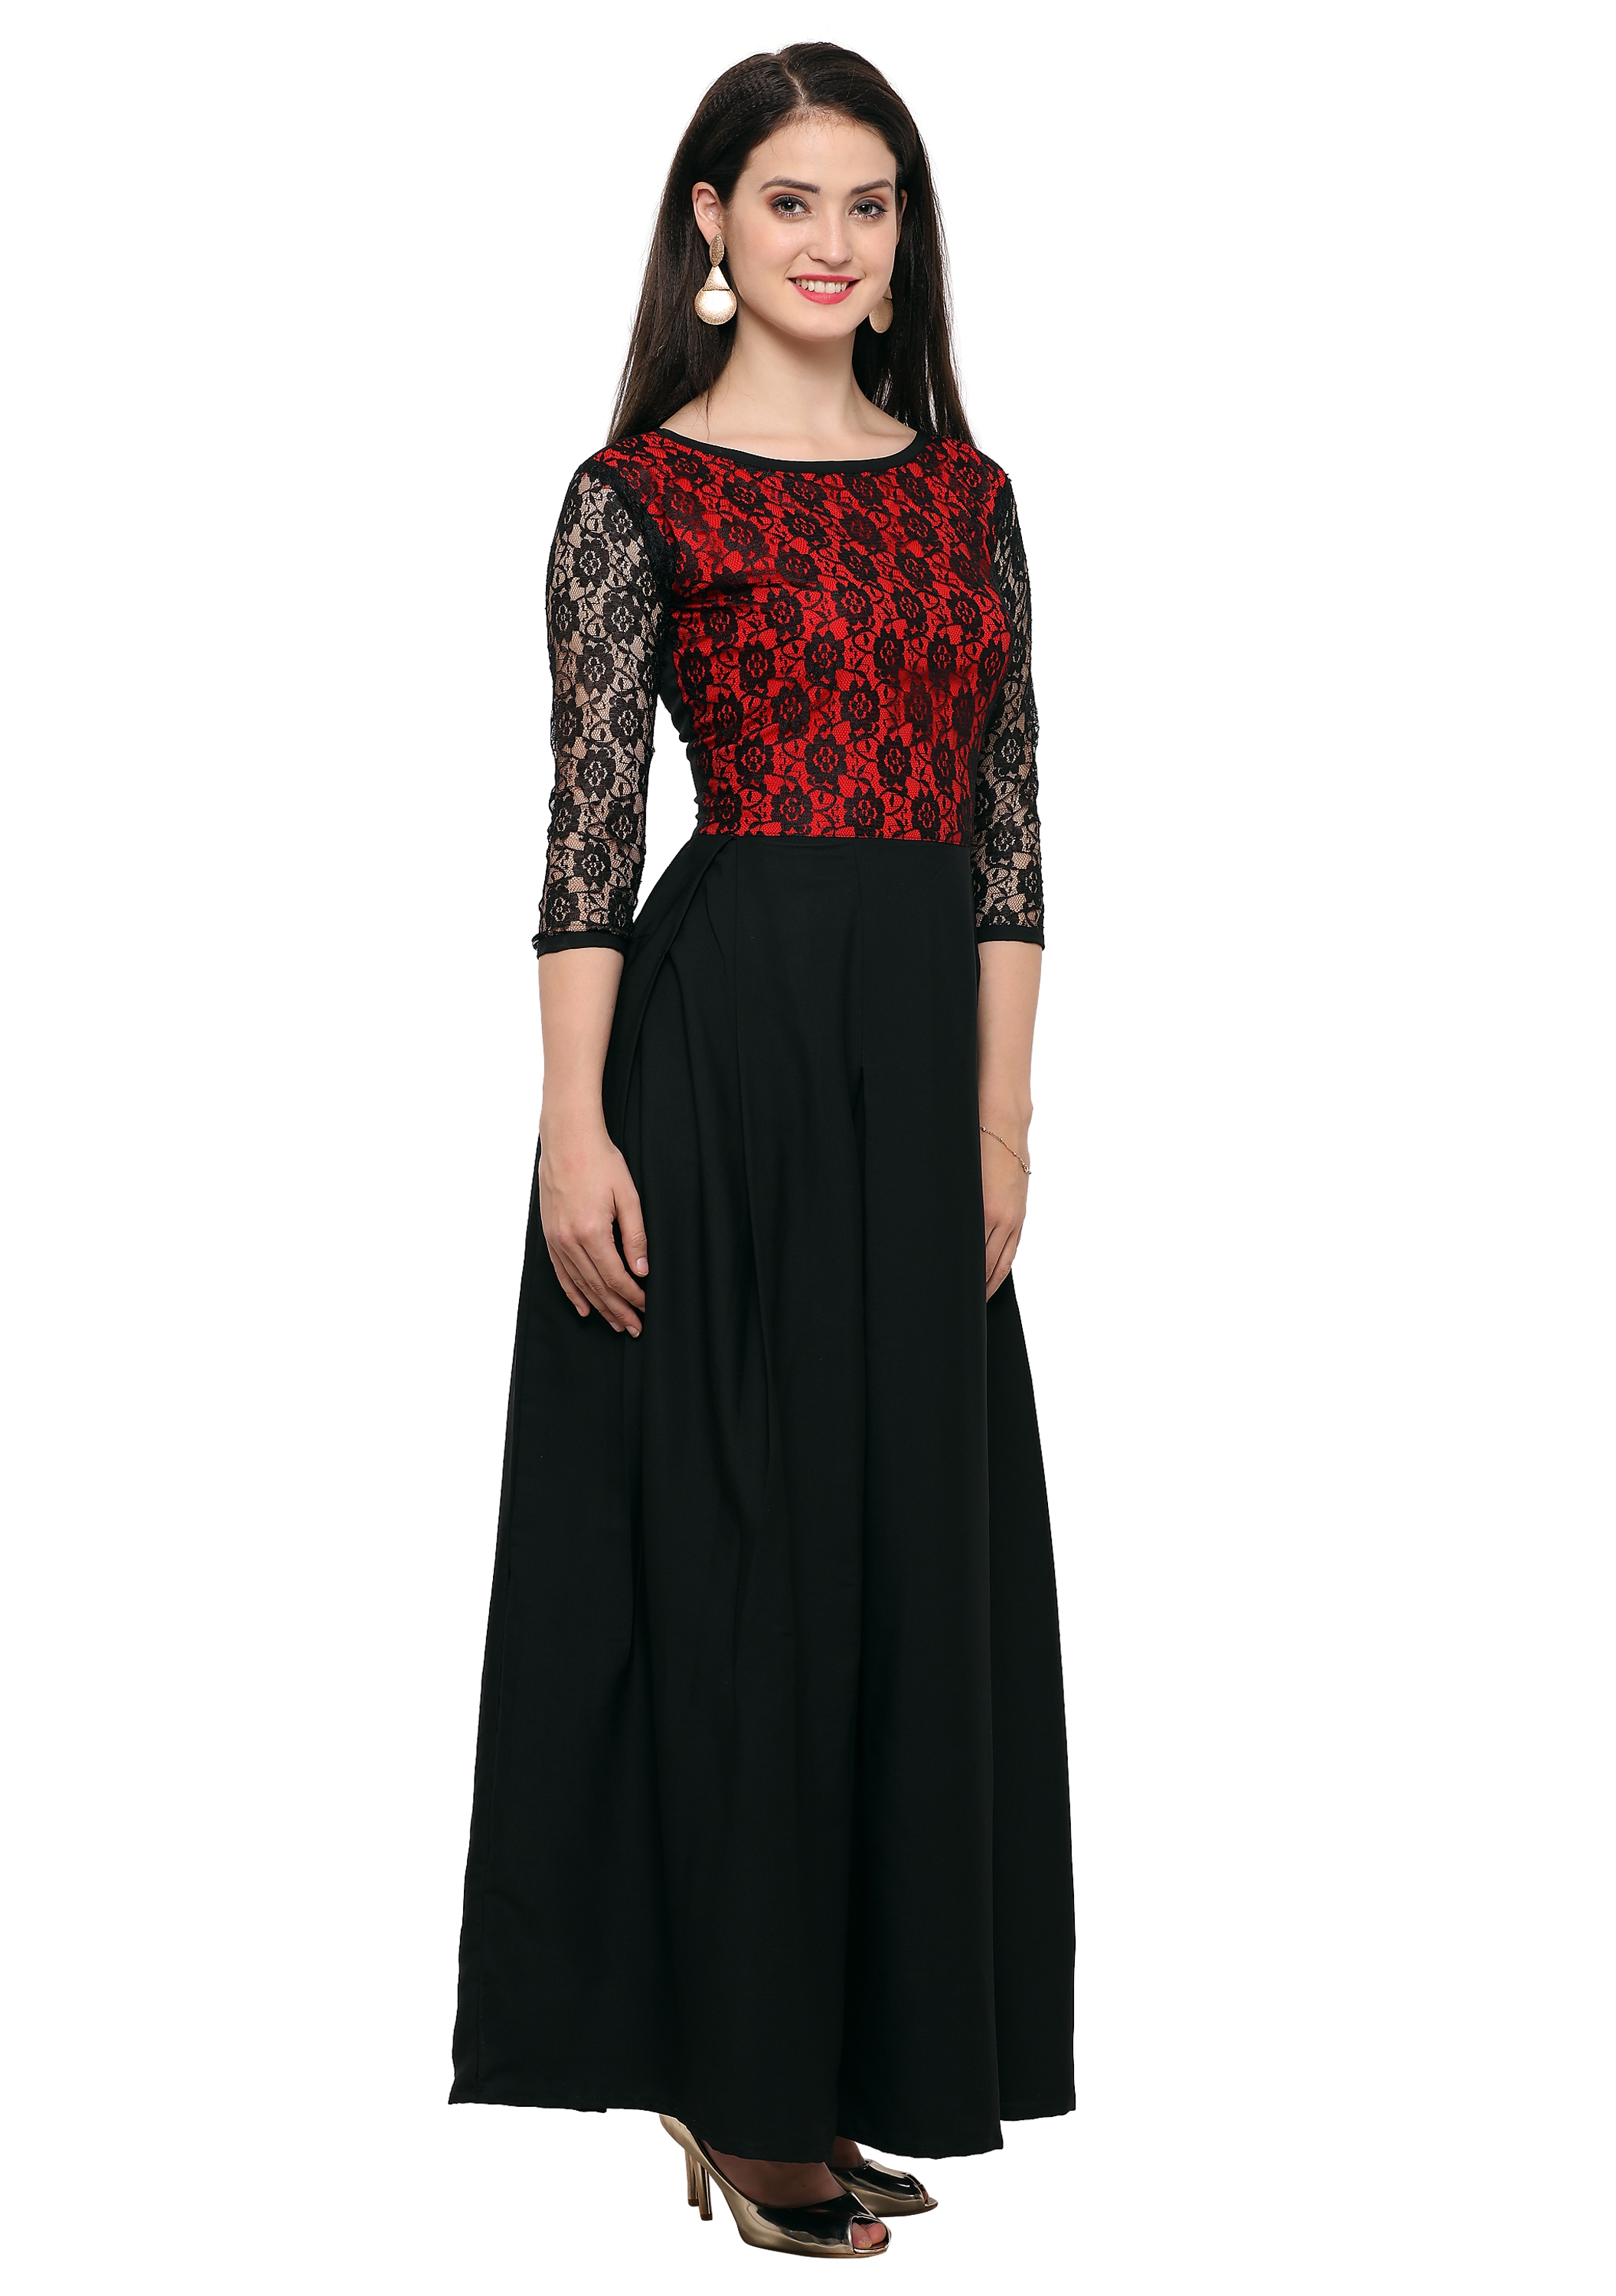 Buy Women's Maxi Red Dress Online @ ₹699 from ShopClues